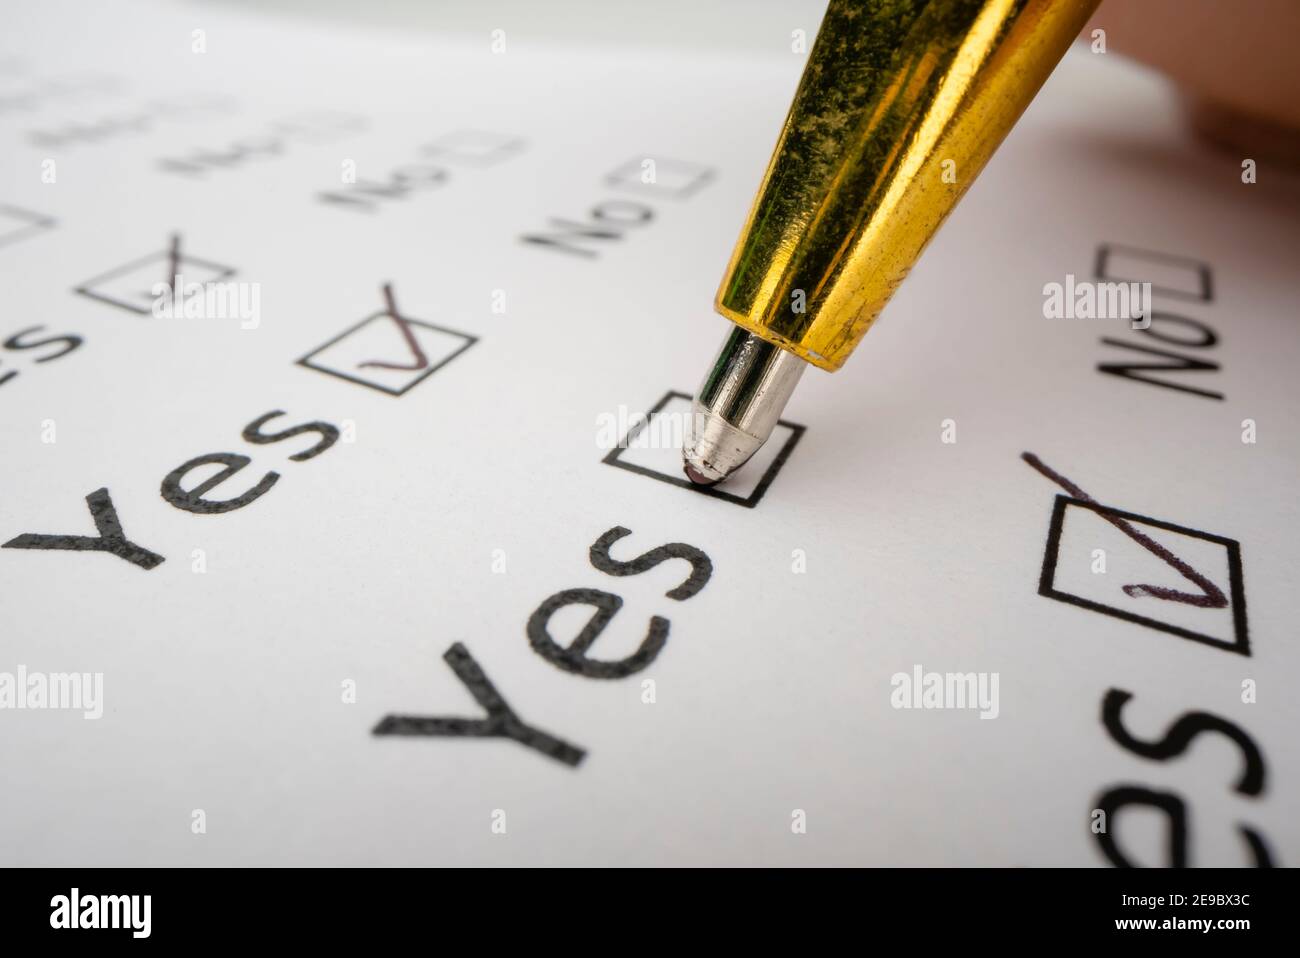 Completing a questionnaire with yes or no questions Stock Photo